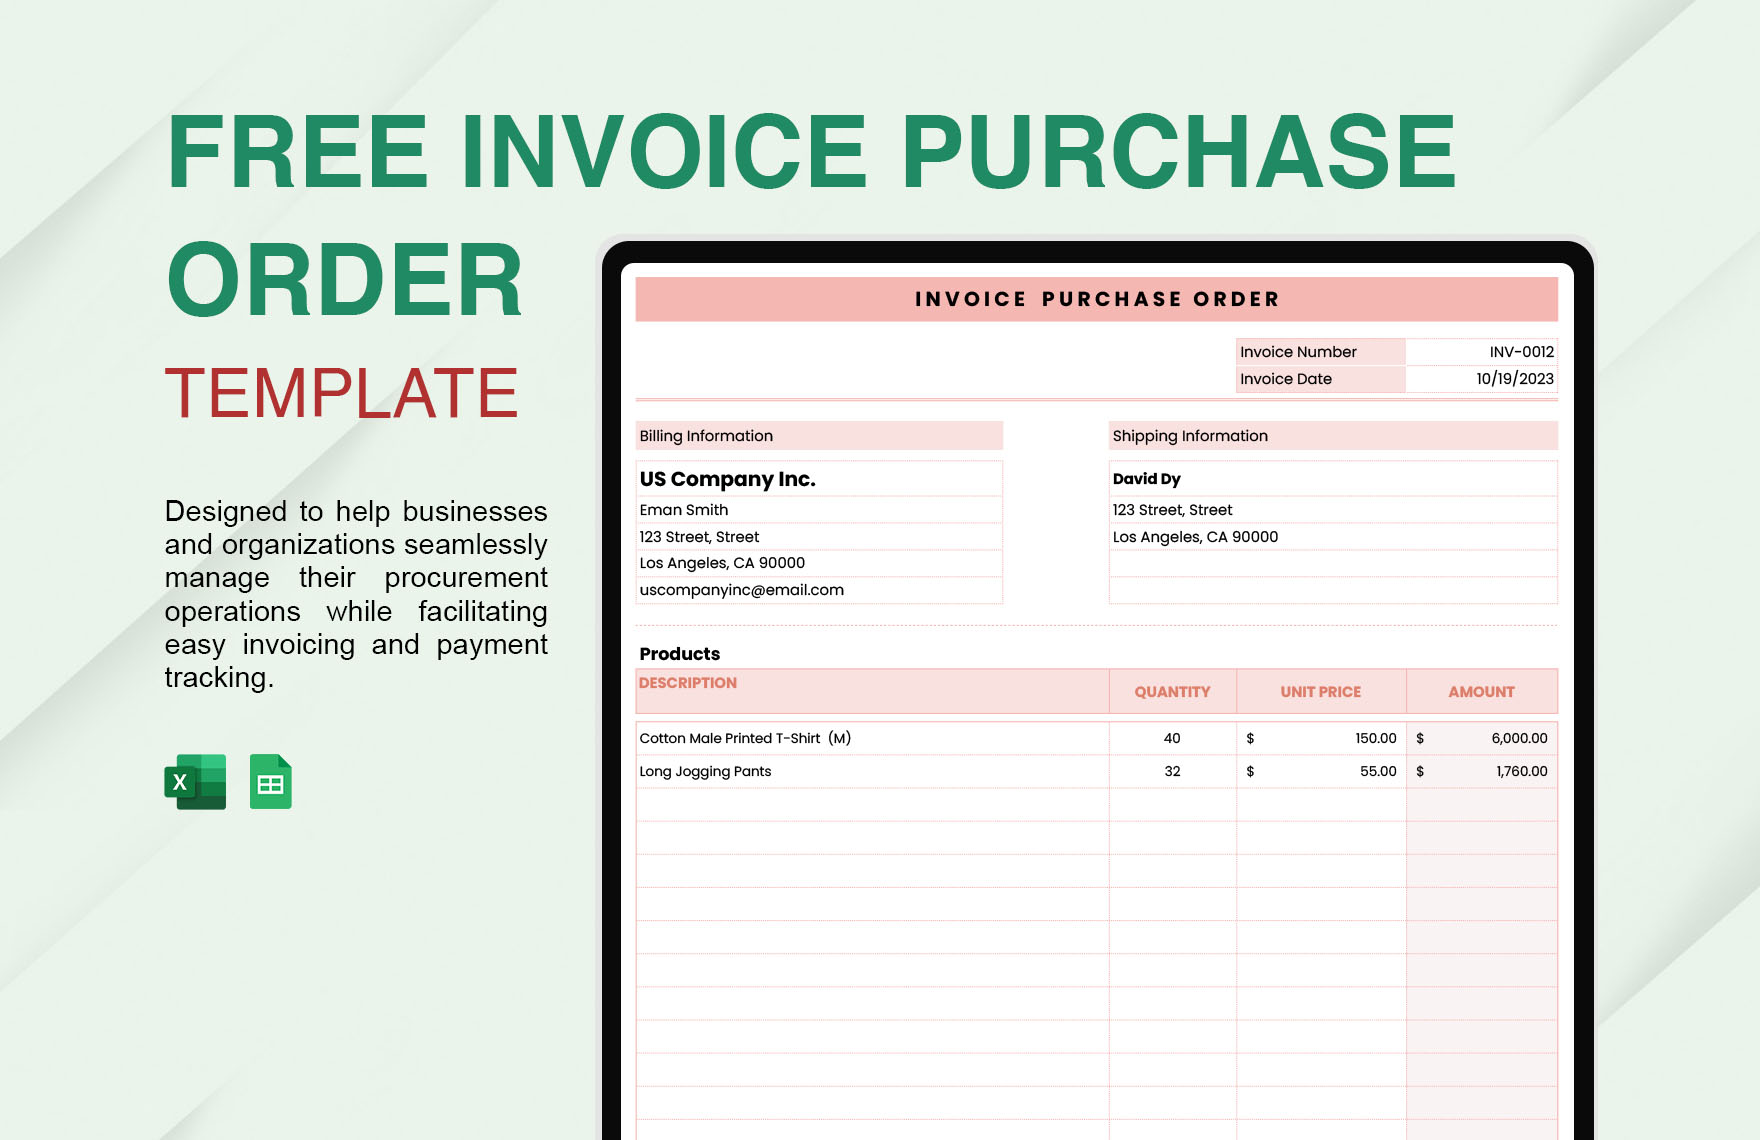 Invoice Purchase Order Template